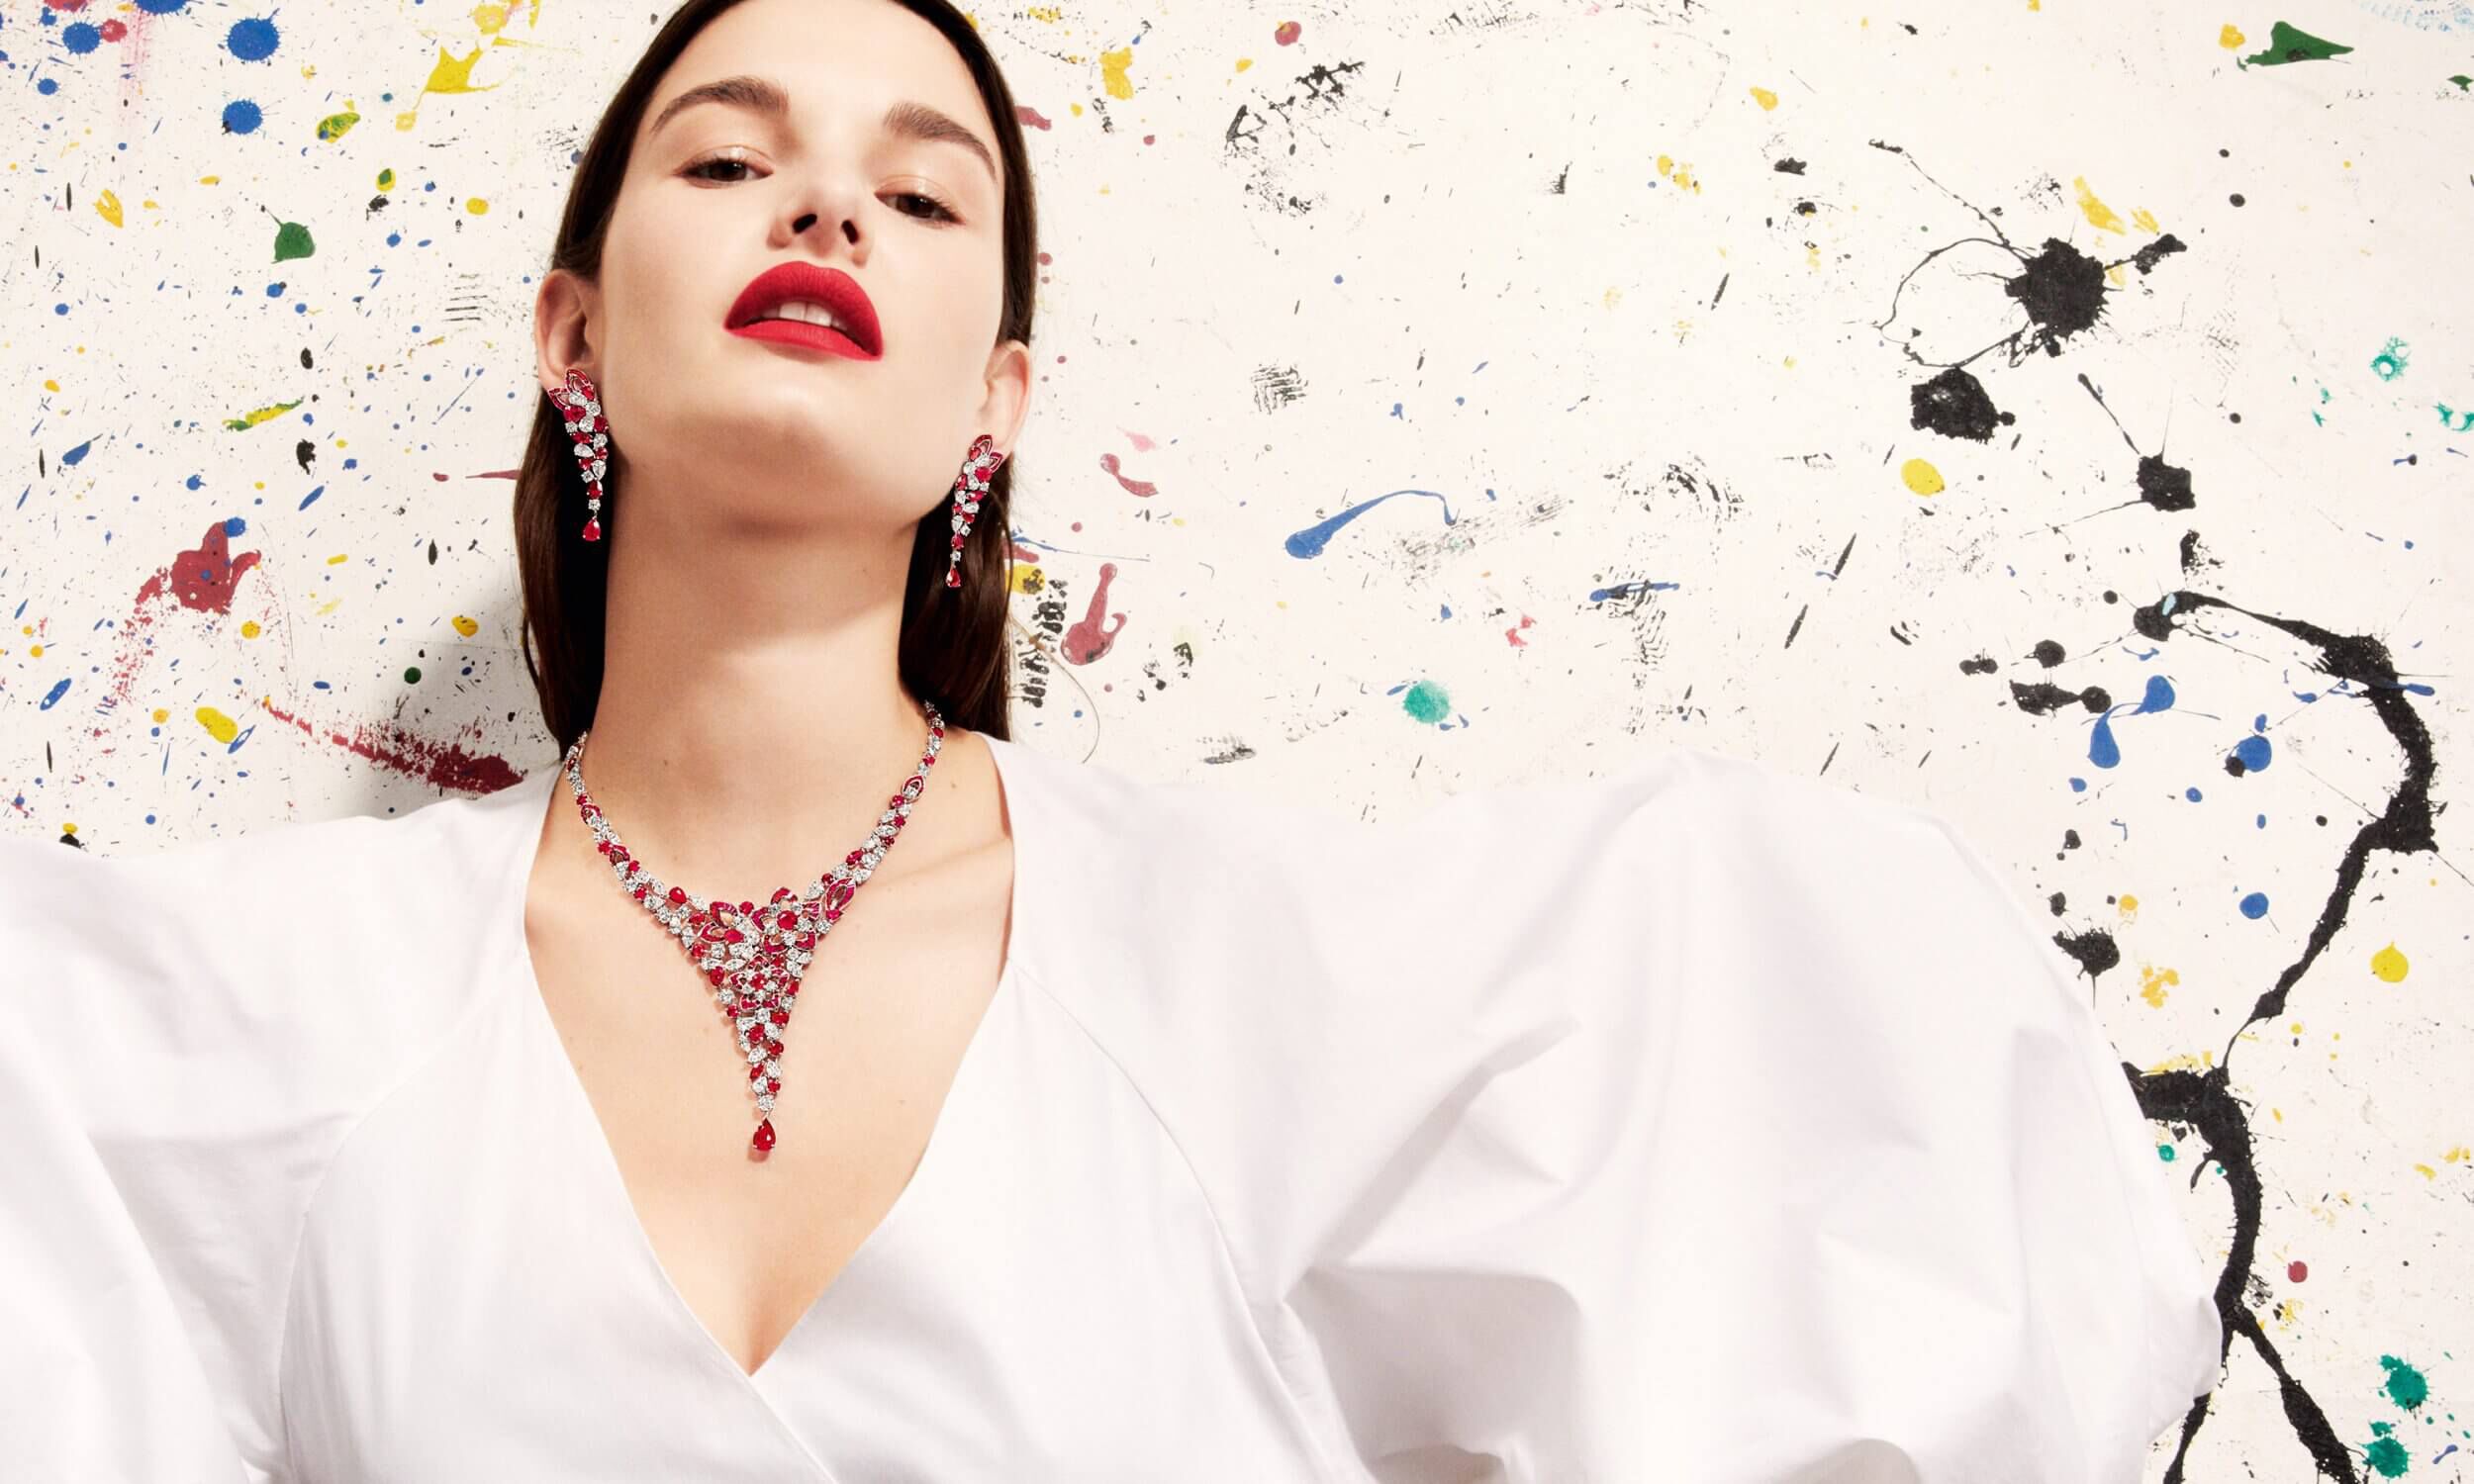 Graff Ruby and Diamond Peony Design necklace by Graff and Ruby and Diamond Peony earrings worn by a model